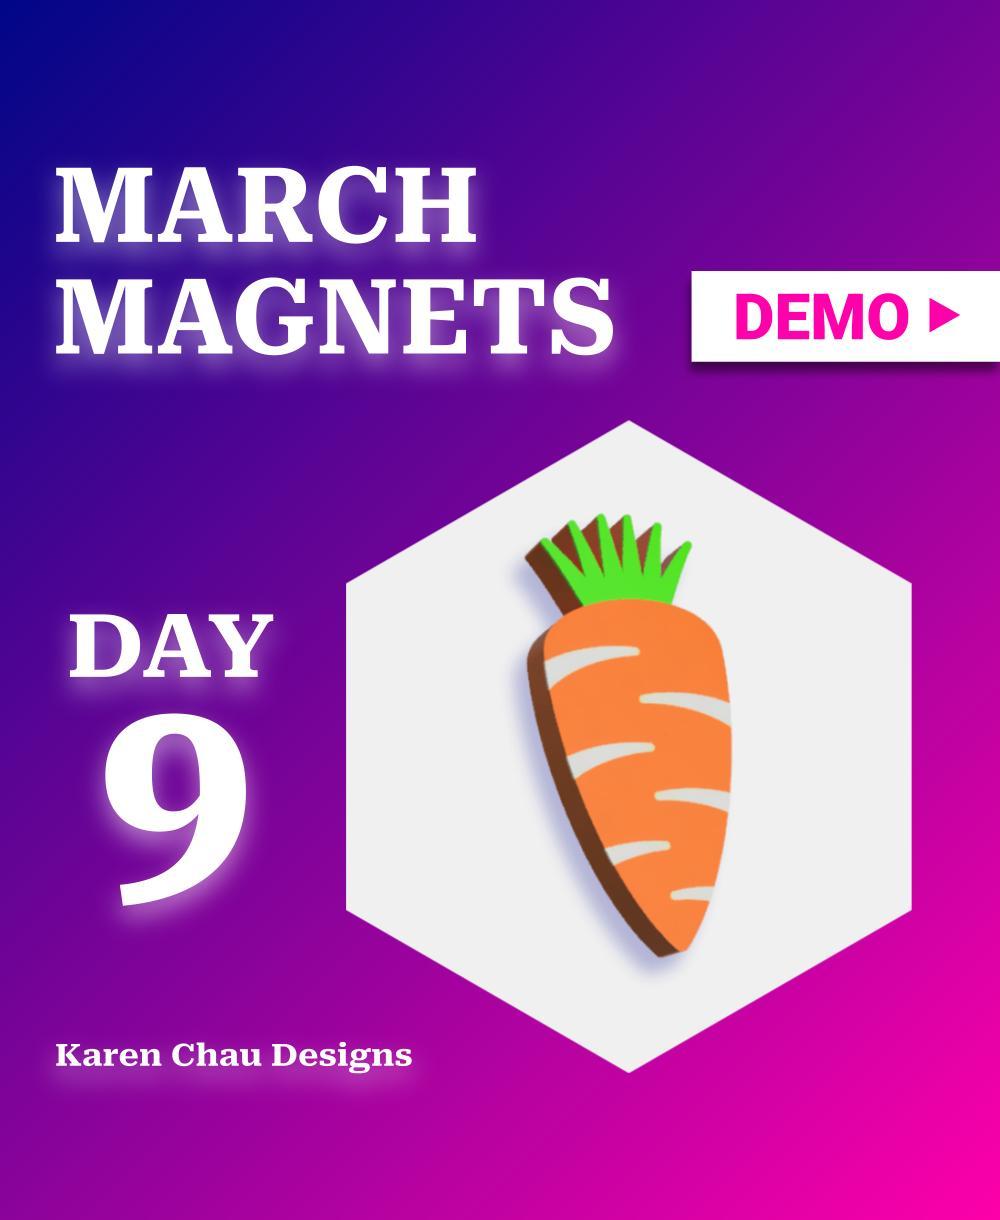 March Magnets - Day 9 #marchmagnets | Carrot 3d model